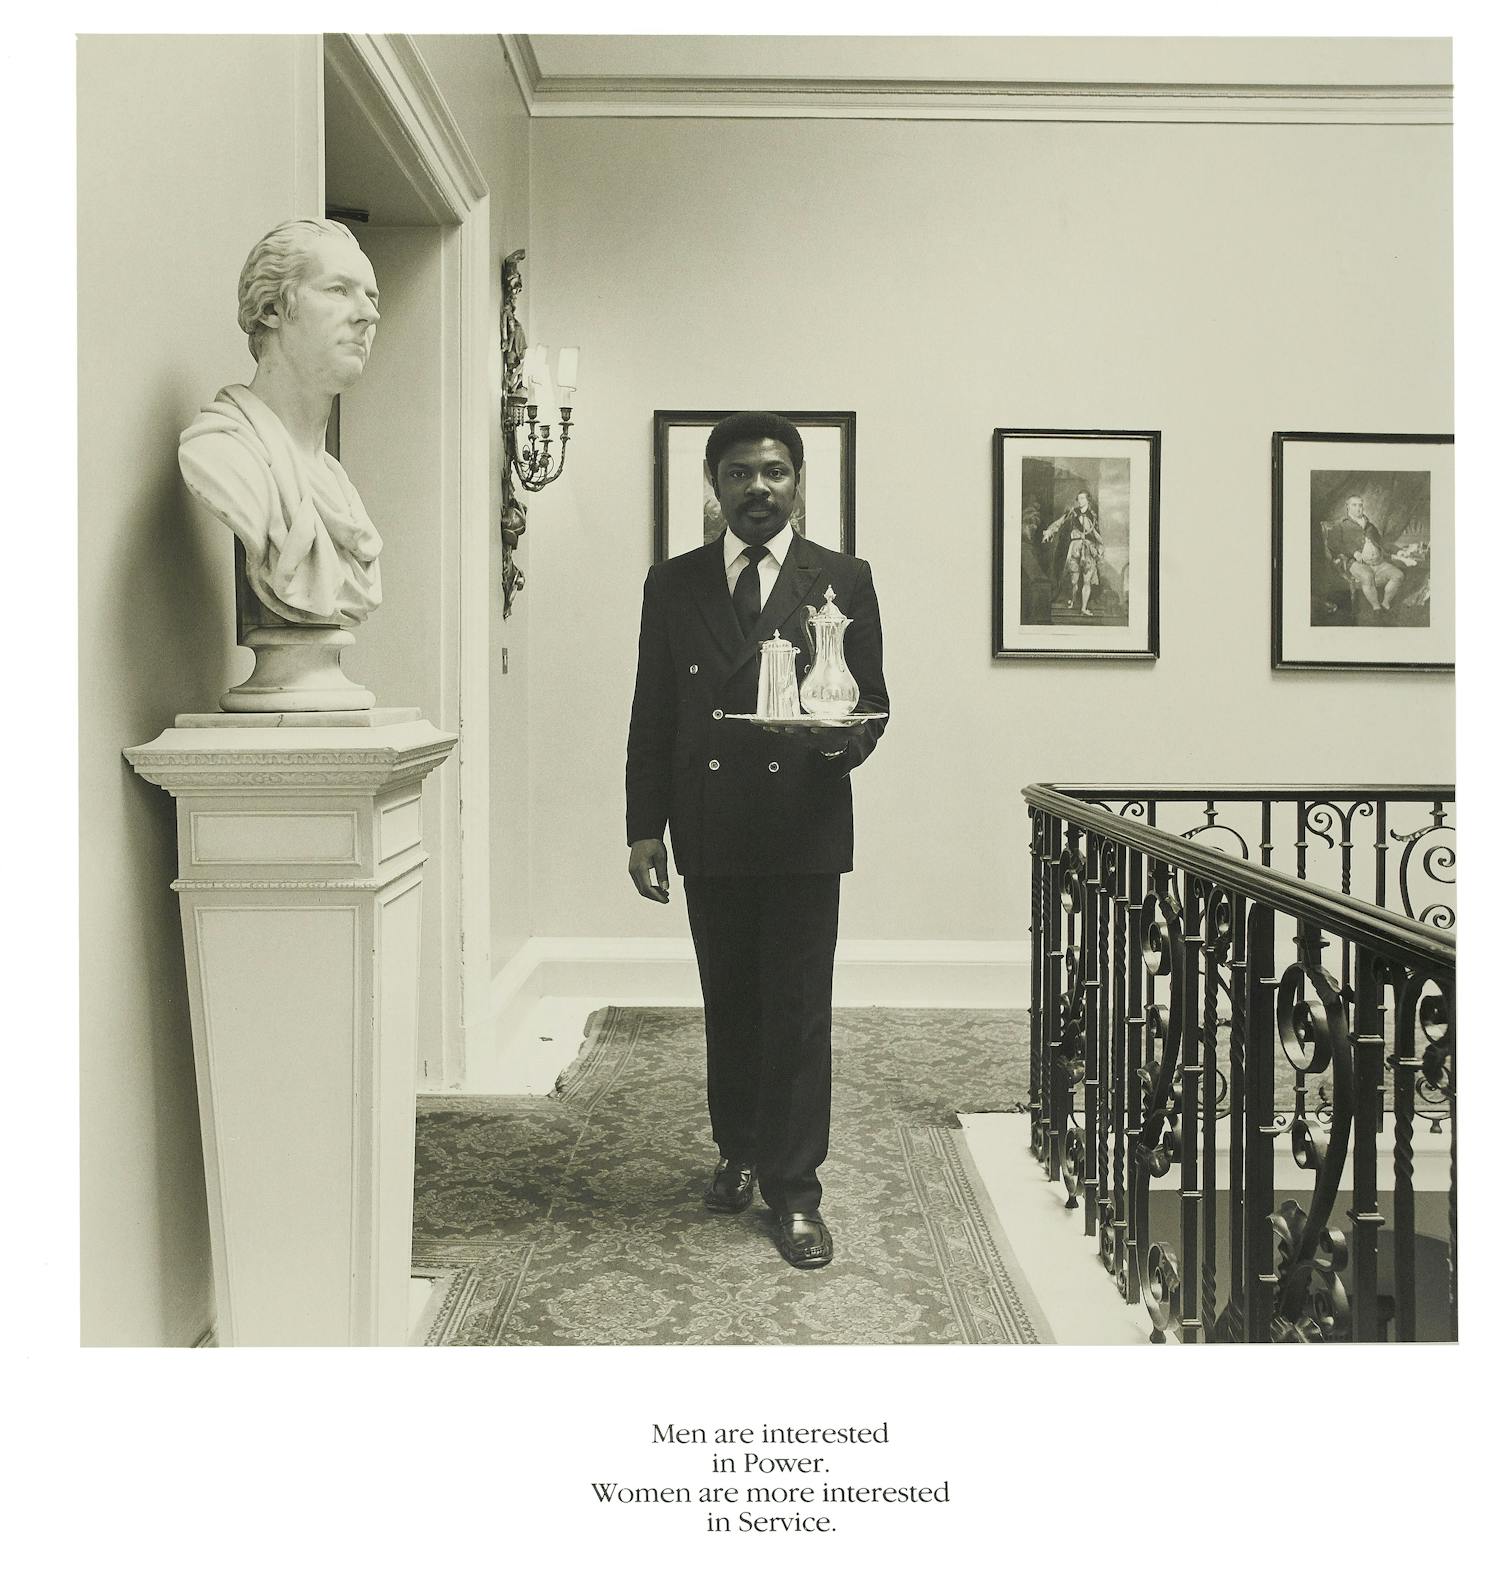 [ID: The first image shows a photograph of a man walking through a hallway towards the camera. He is carrying a tableau with two carafes on it. On the left side of the image is a marble bust of a man, looking to the top right corner of the image. End of ID]